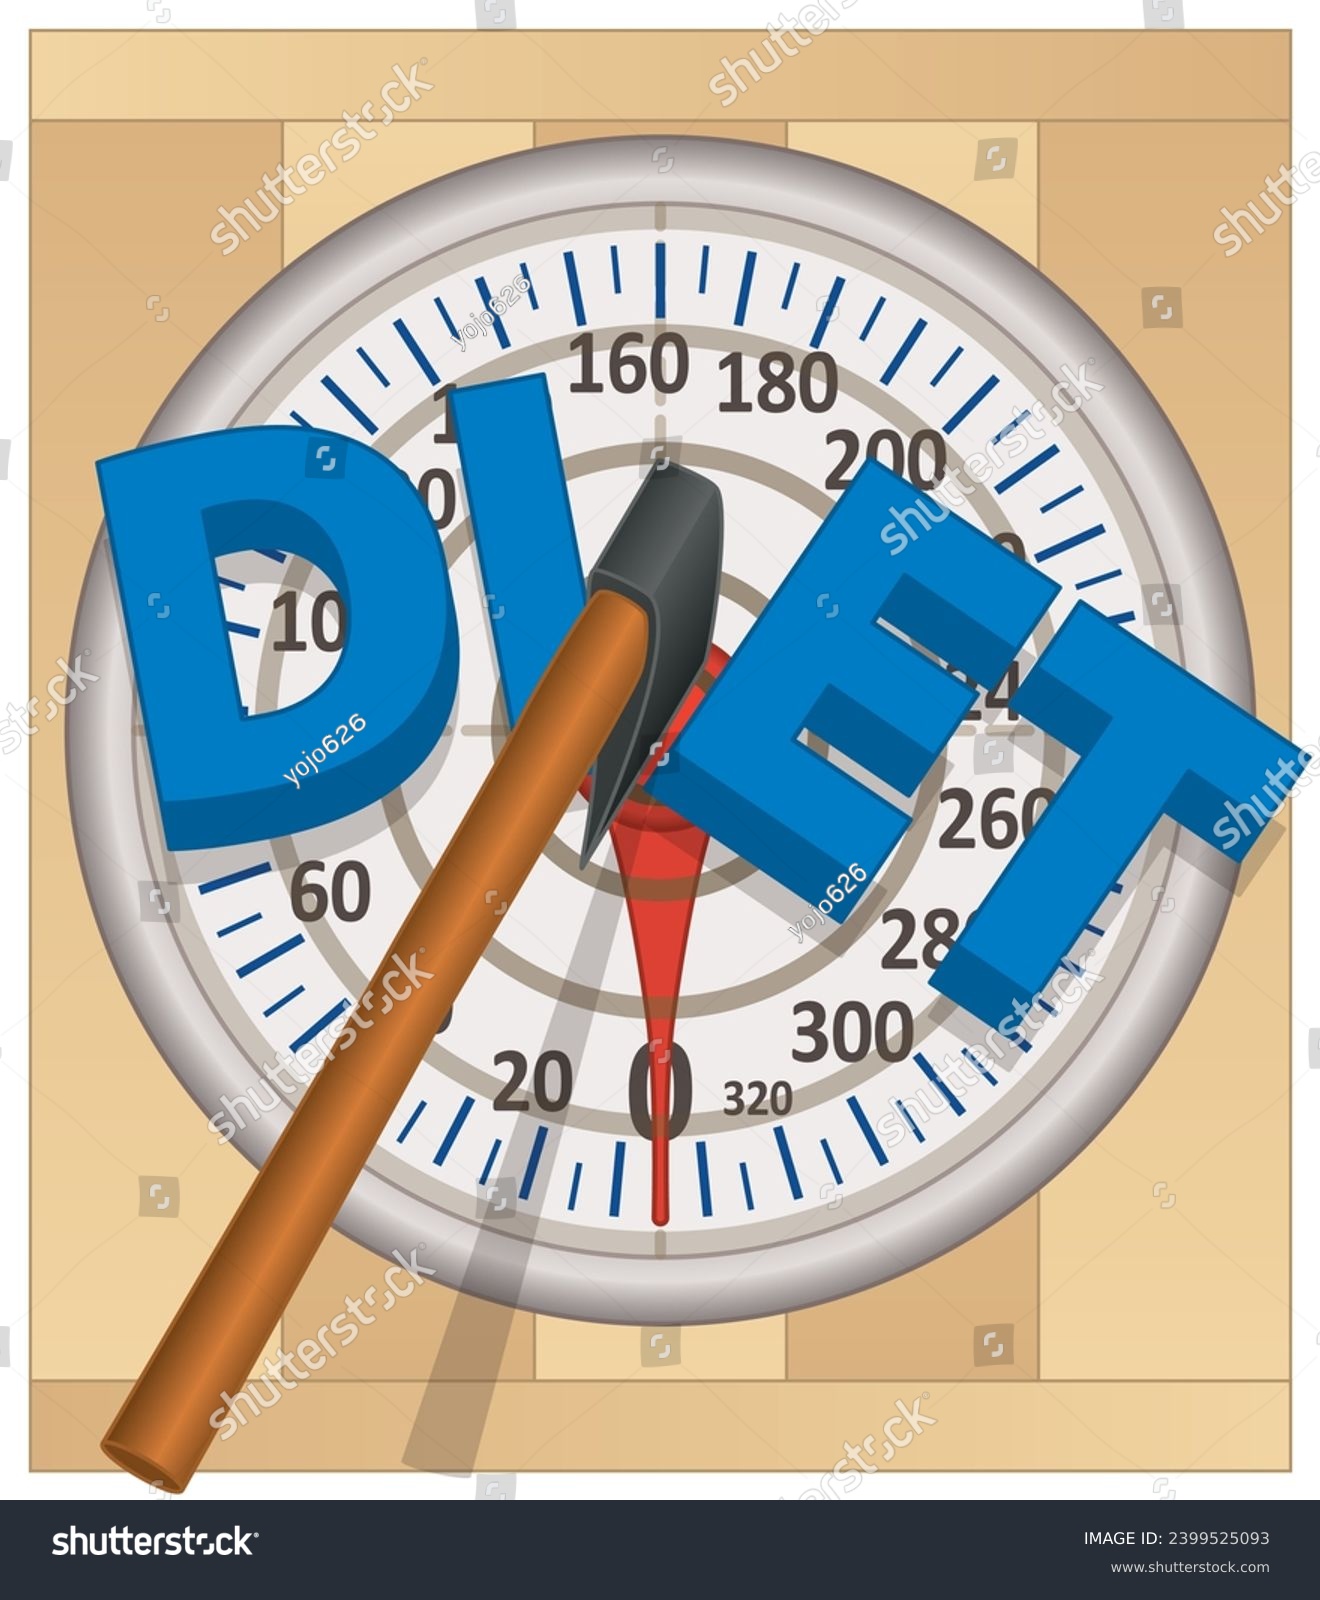 SVG of axe throwing, axe cutting in half the word diet on a weigh scale dial with target svg